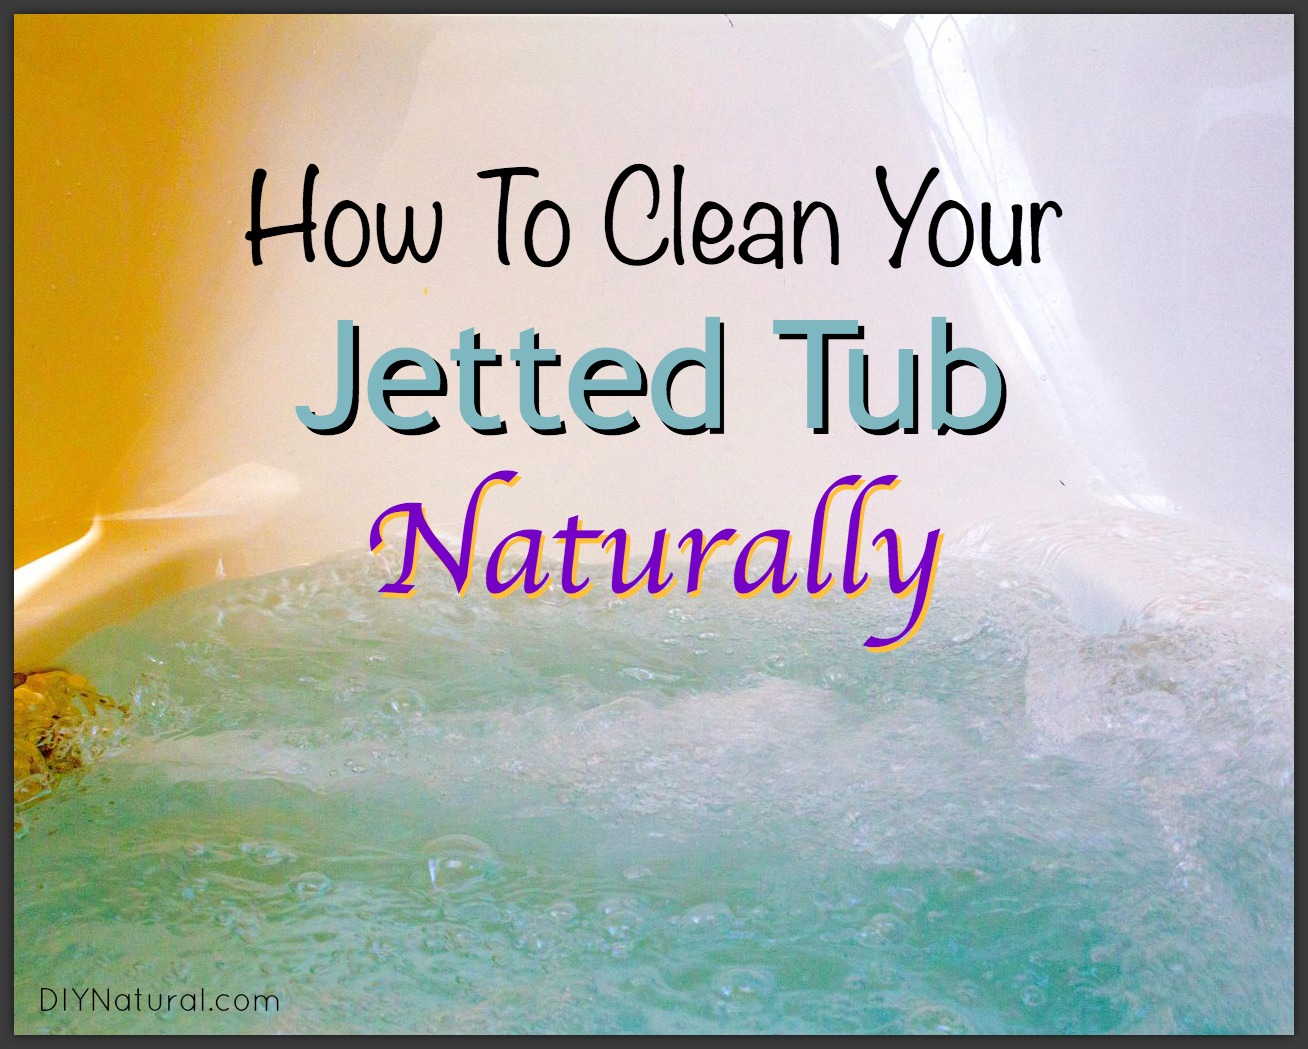 How To Clean A Jetted Tub Naturally, How To Clean A Jacuzzi Bathtub